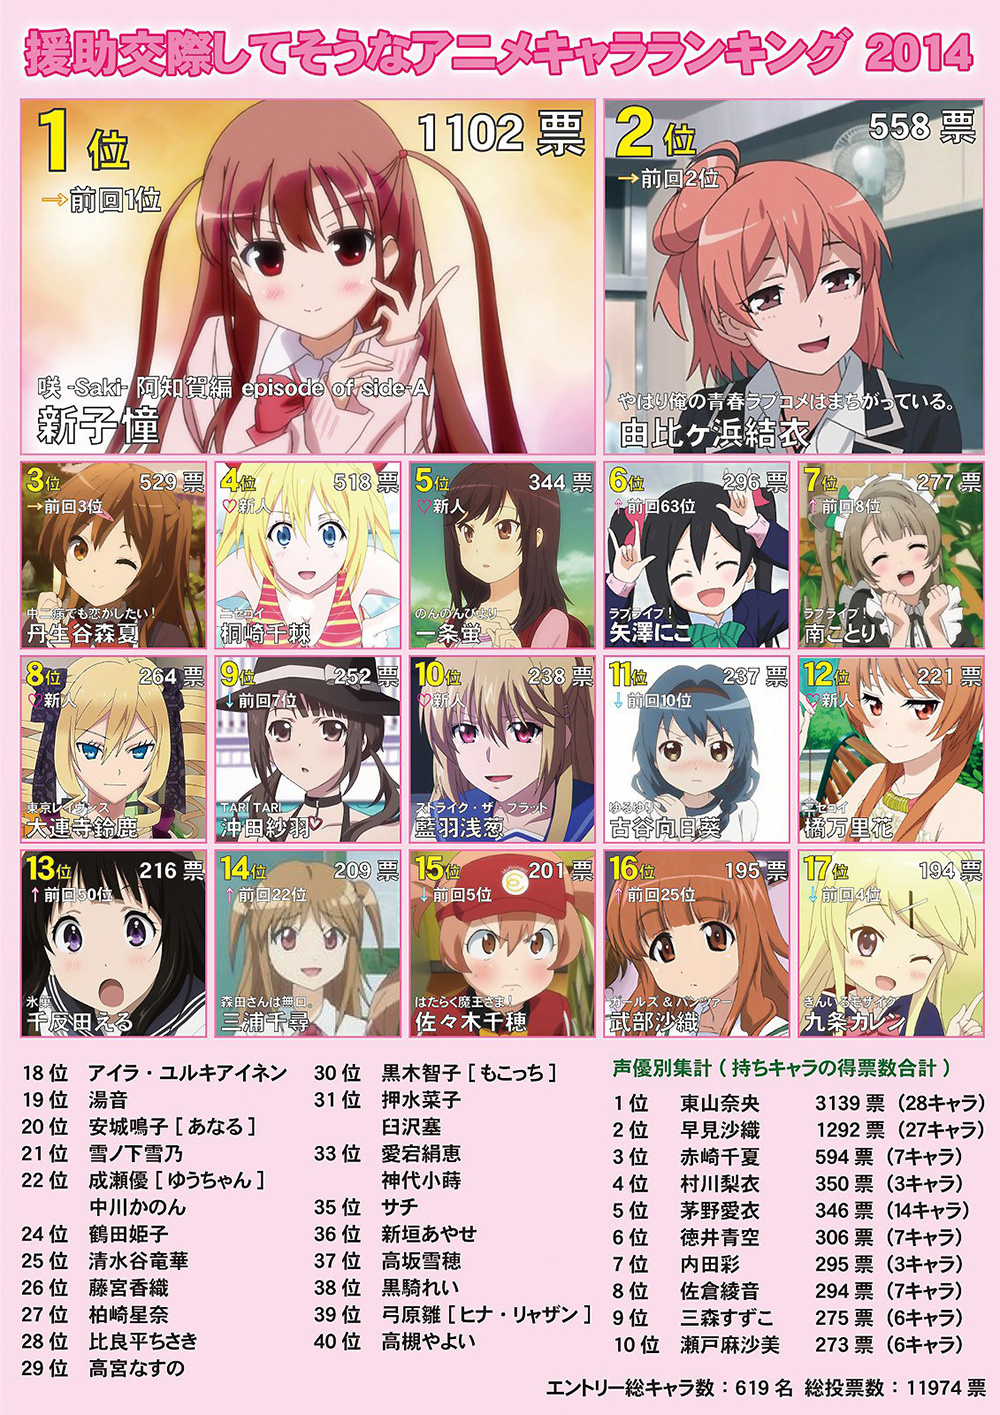 2ch-Top-Anime-Characters-They-Want-to-Date-2014